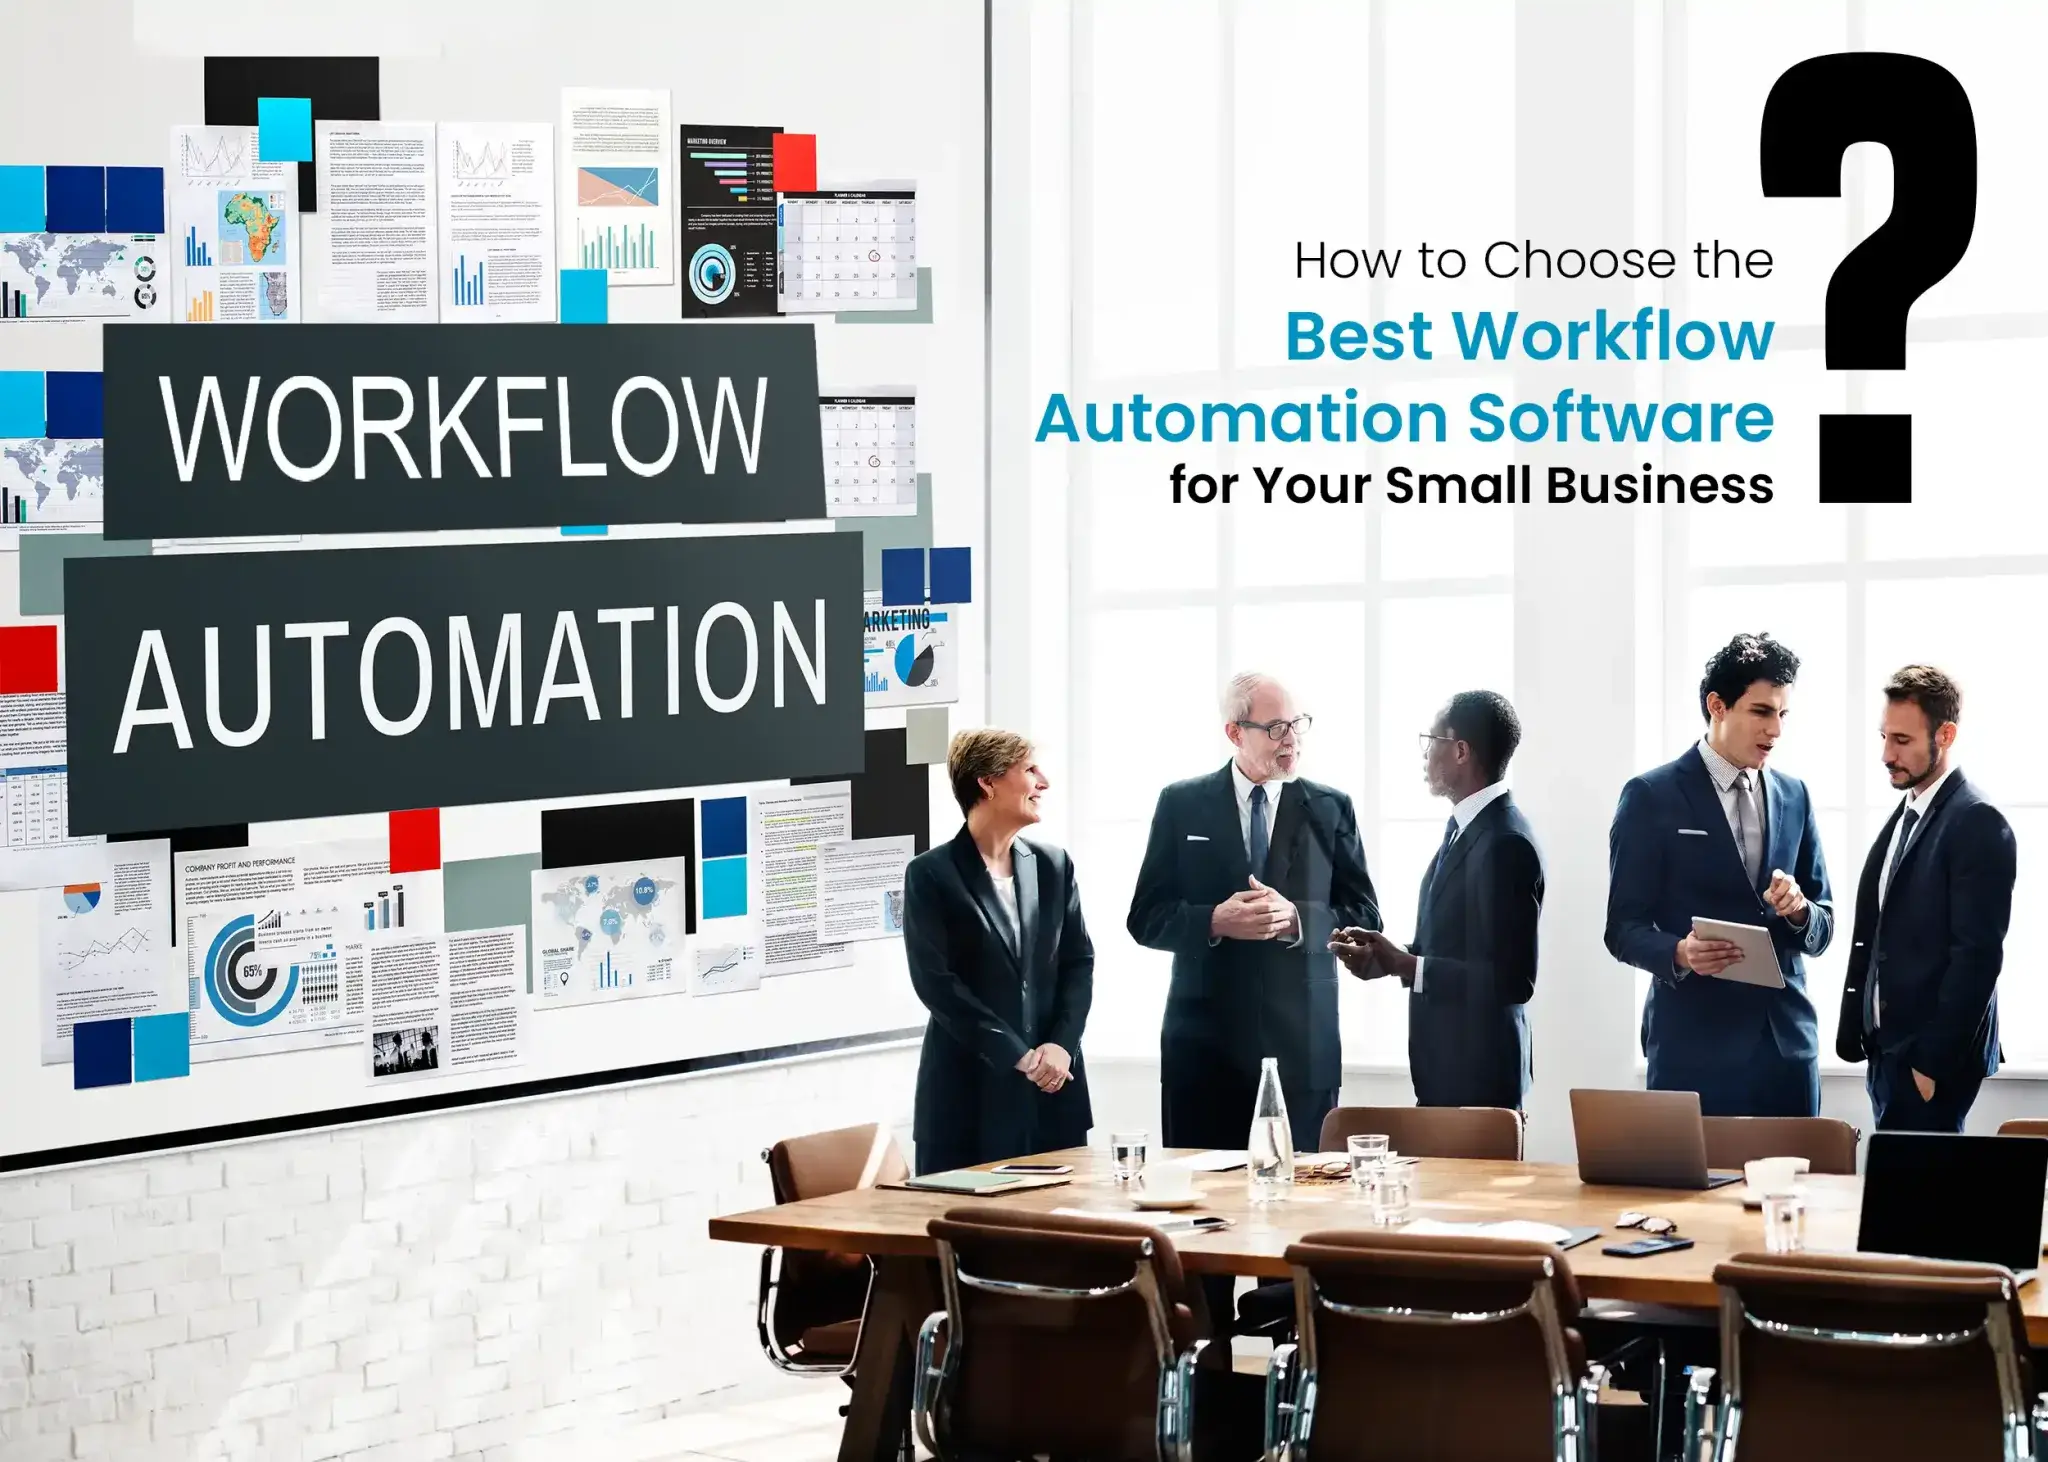 How to Choose Best Workflow Automation for Your Small Business?